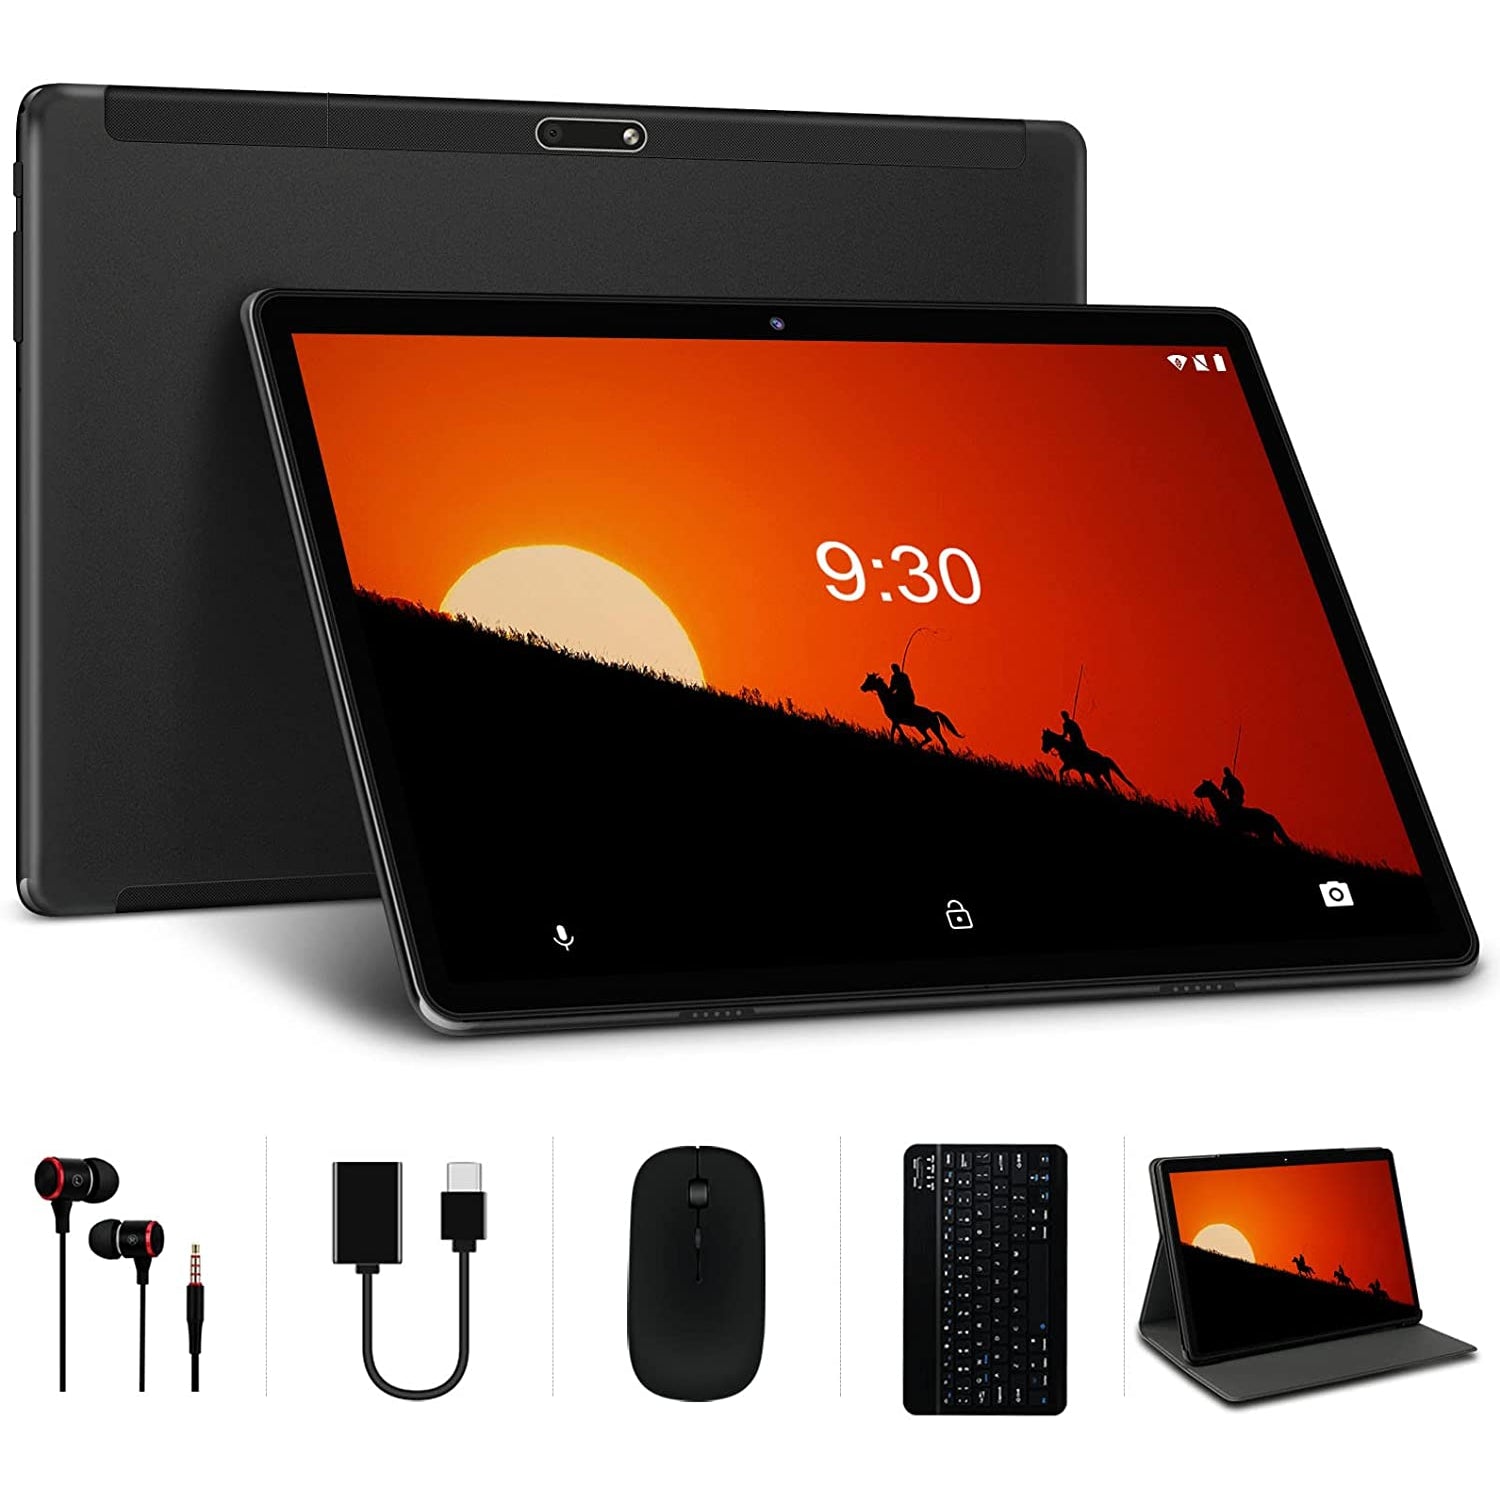 Yestel X7 Tablet - 10.1", 4GB RAM, 64GB HDD with Tablet Case - Black